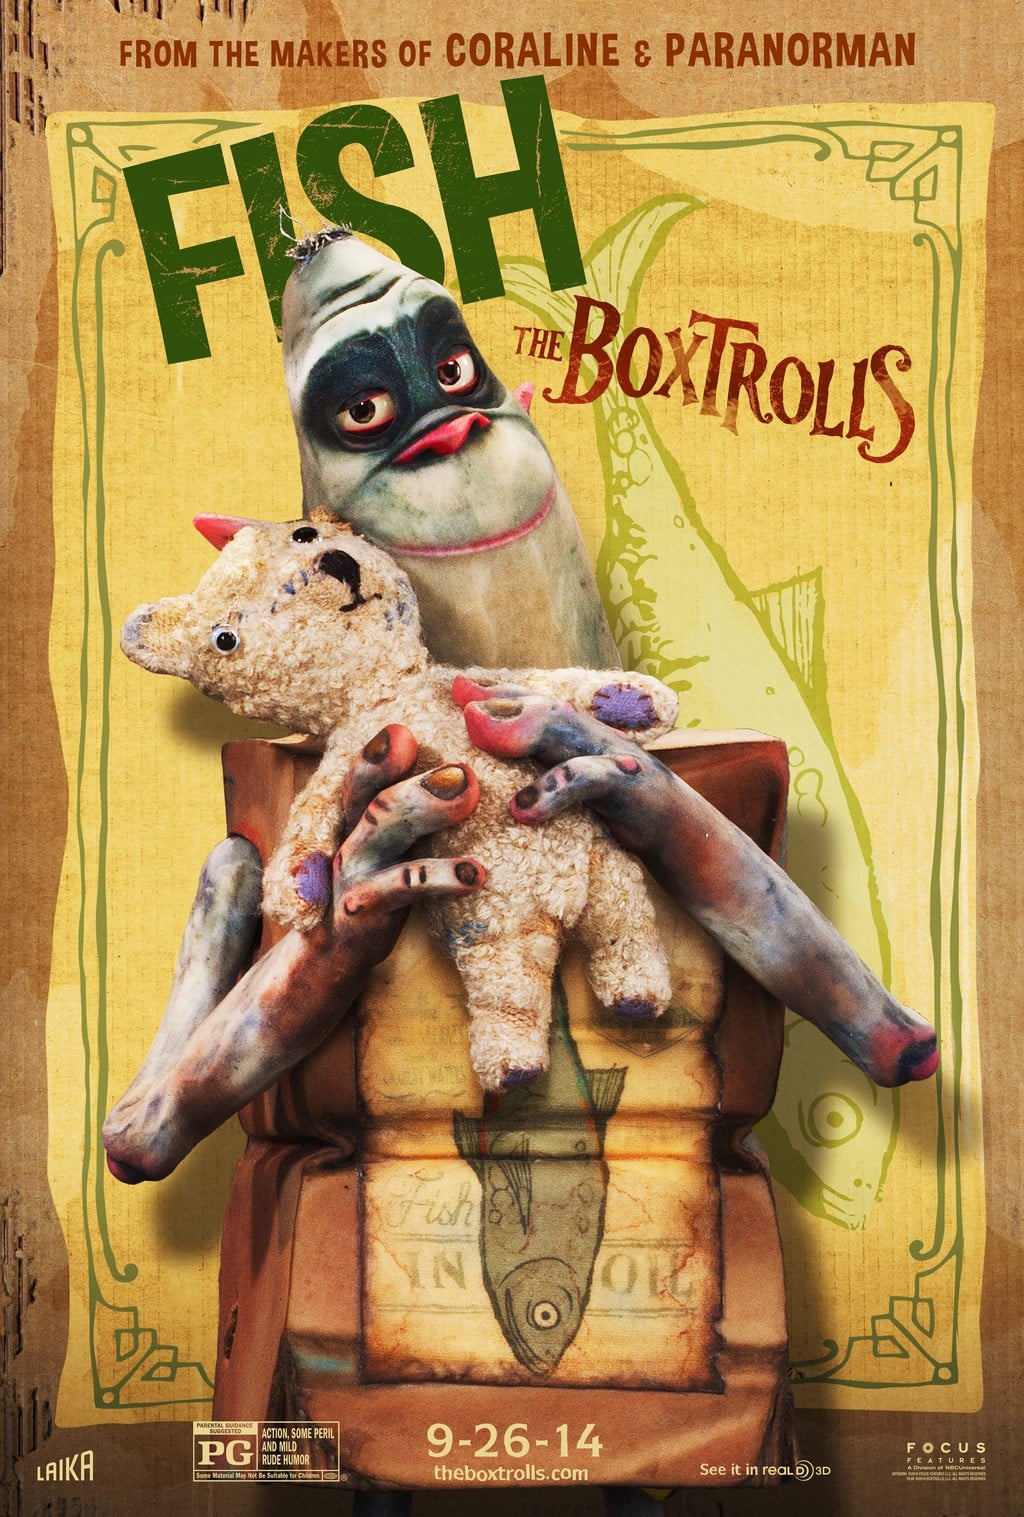 Meet The Boxtrolls: Character Posters Available Now